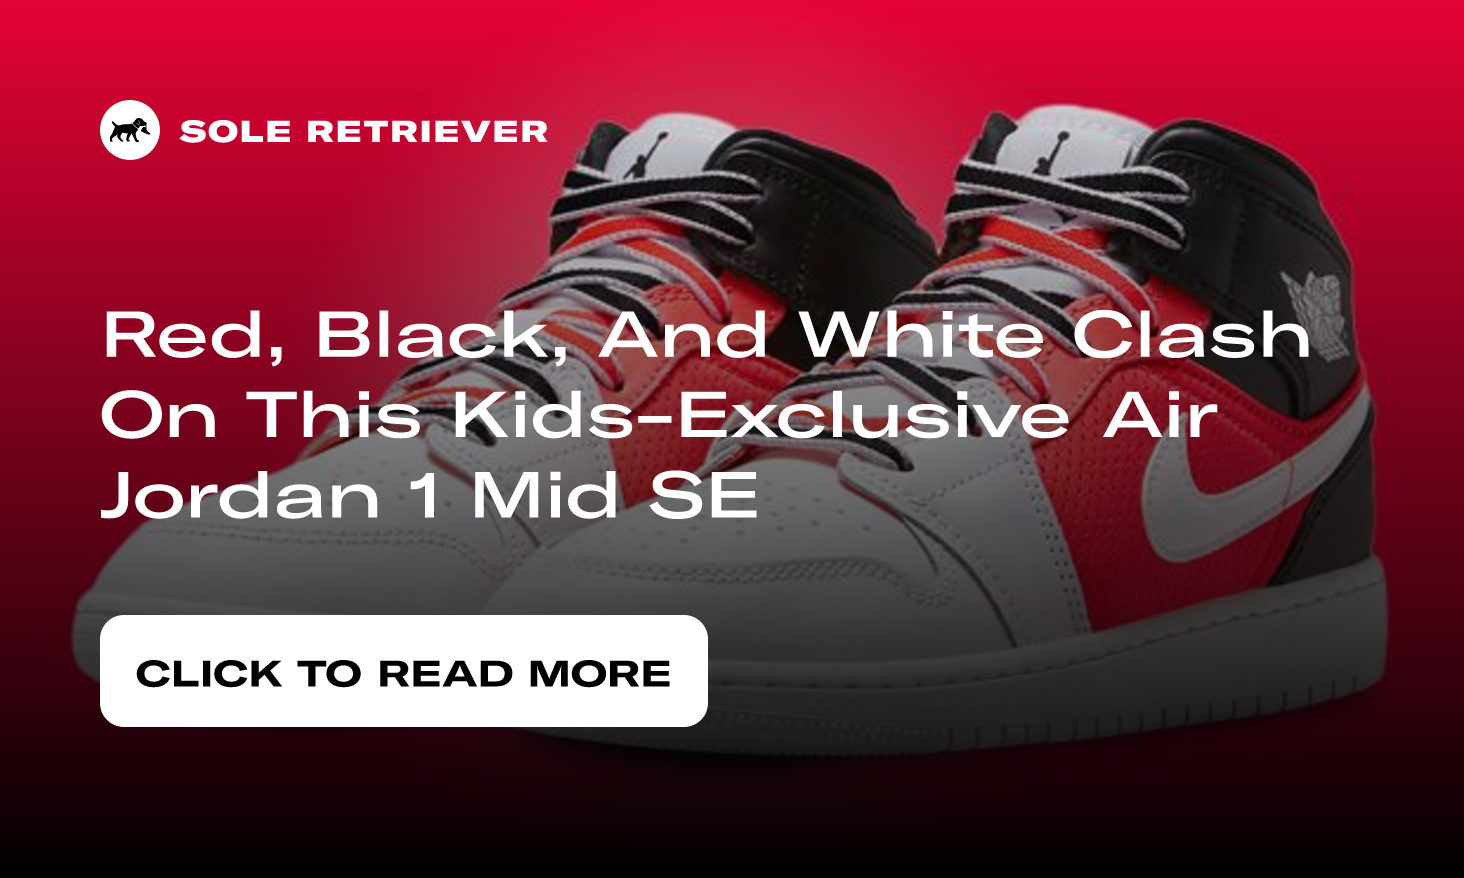 Red, Black, And White Clash On This Kids-Exclusive Air Jordan 1 Mid SE